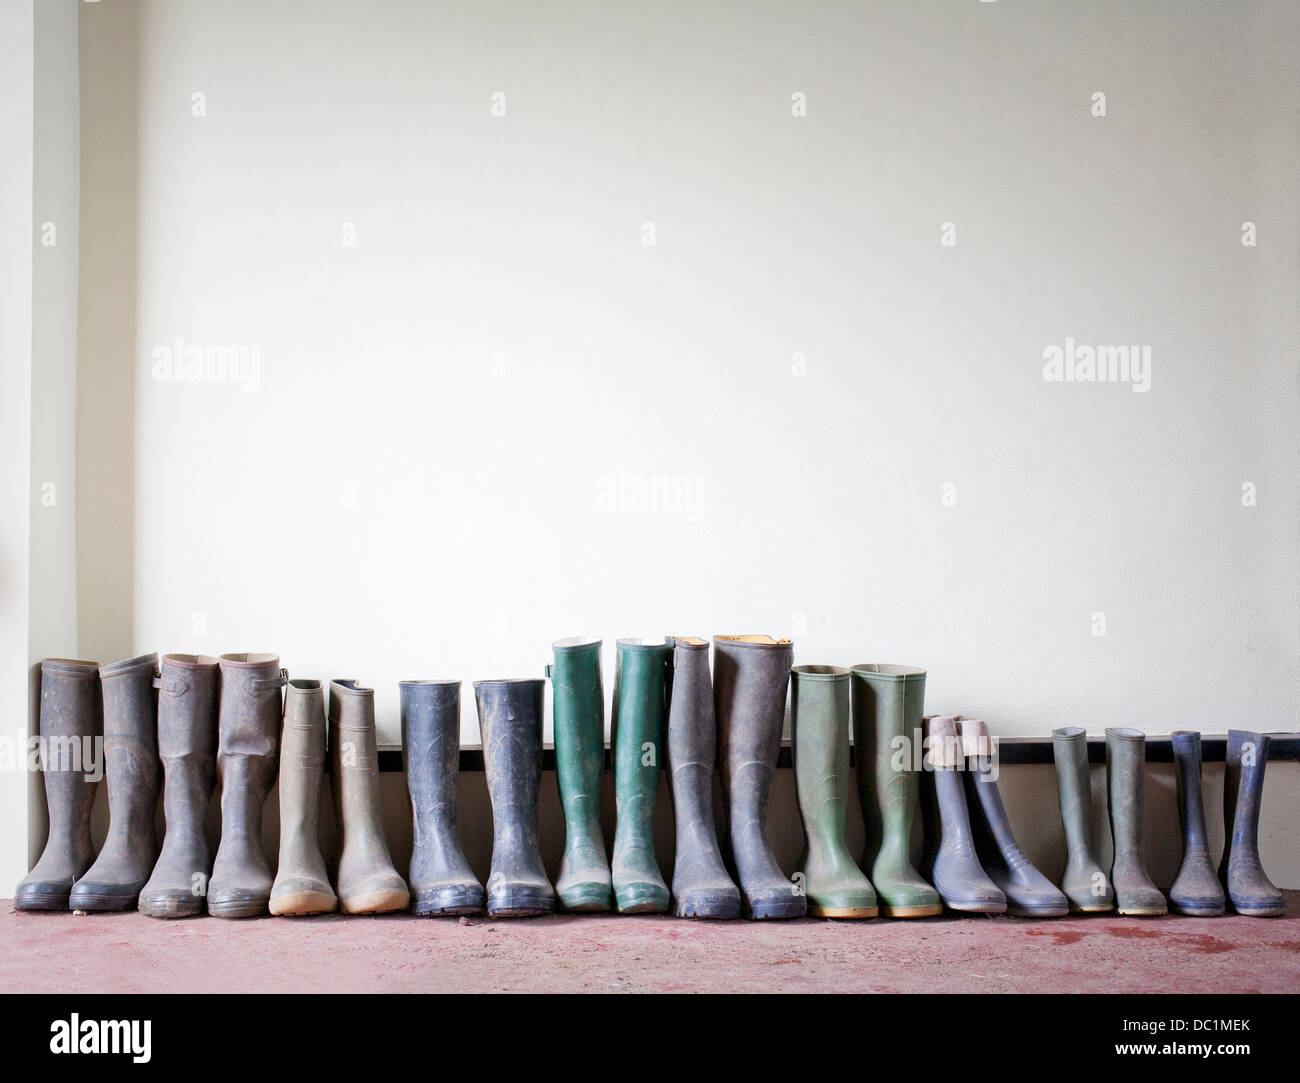 Rubber boots in a row Stock Photo